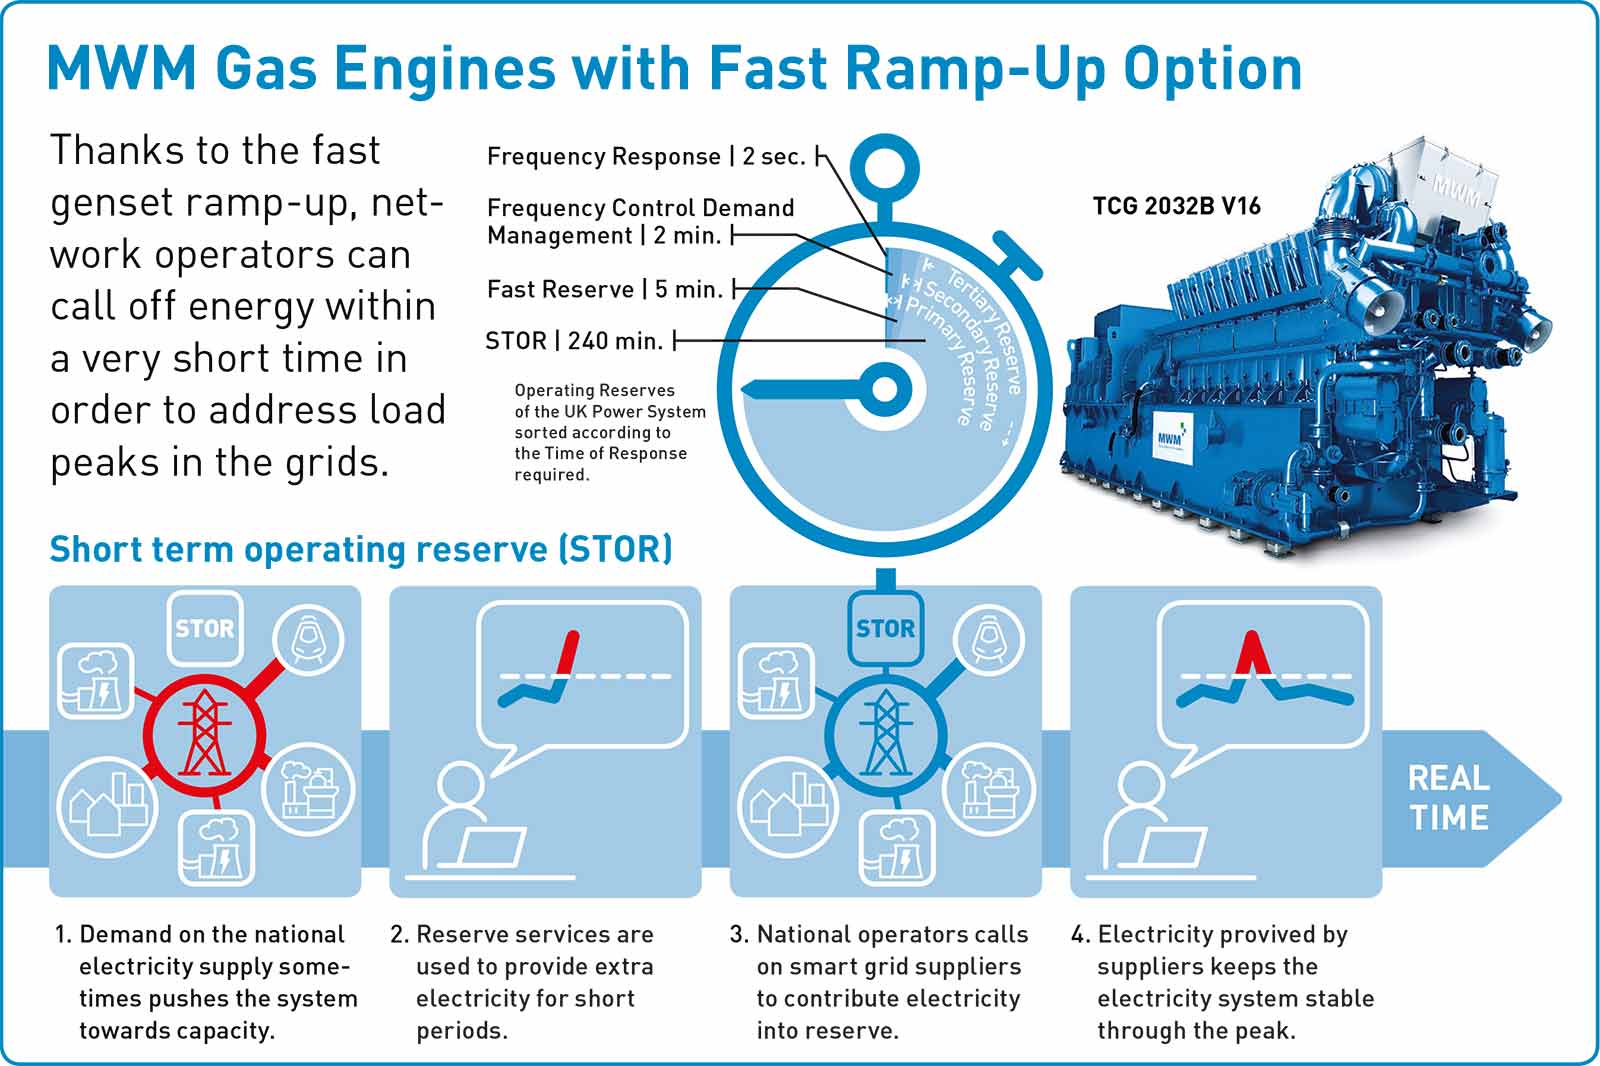 MWM Gas Engines with Fast Ramp-Up Option